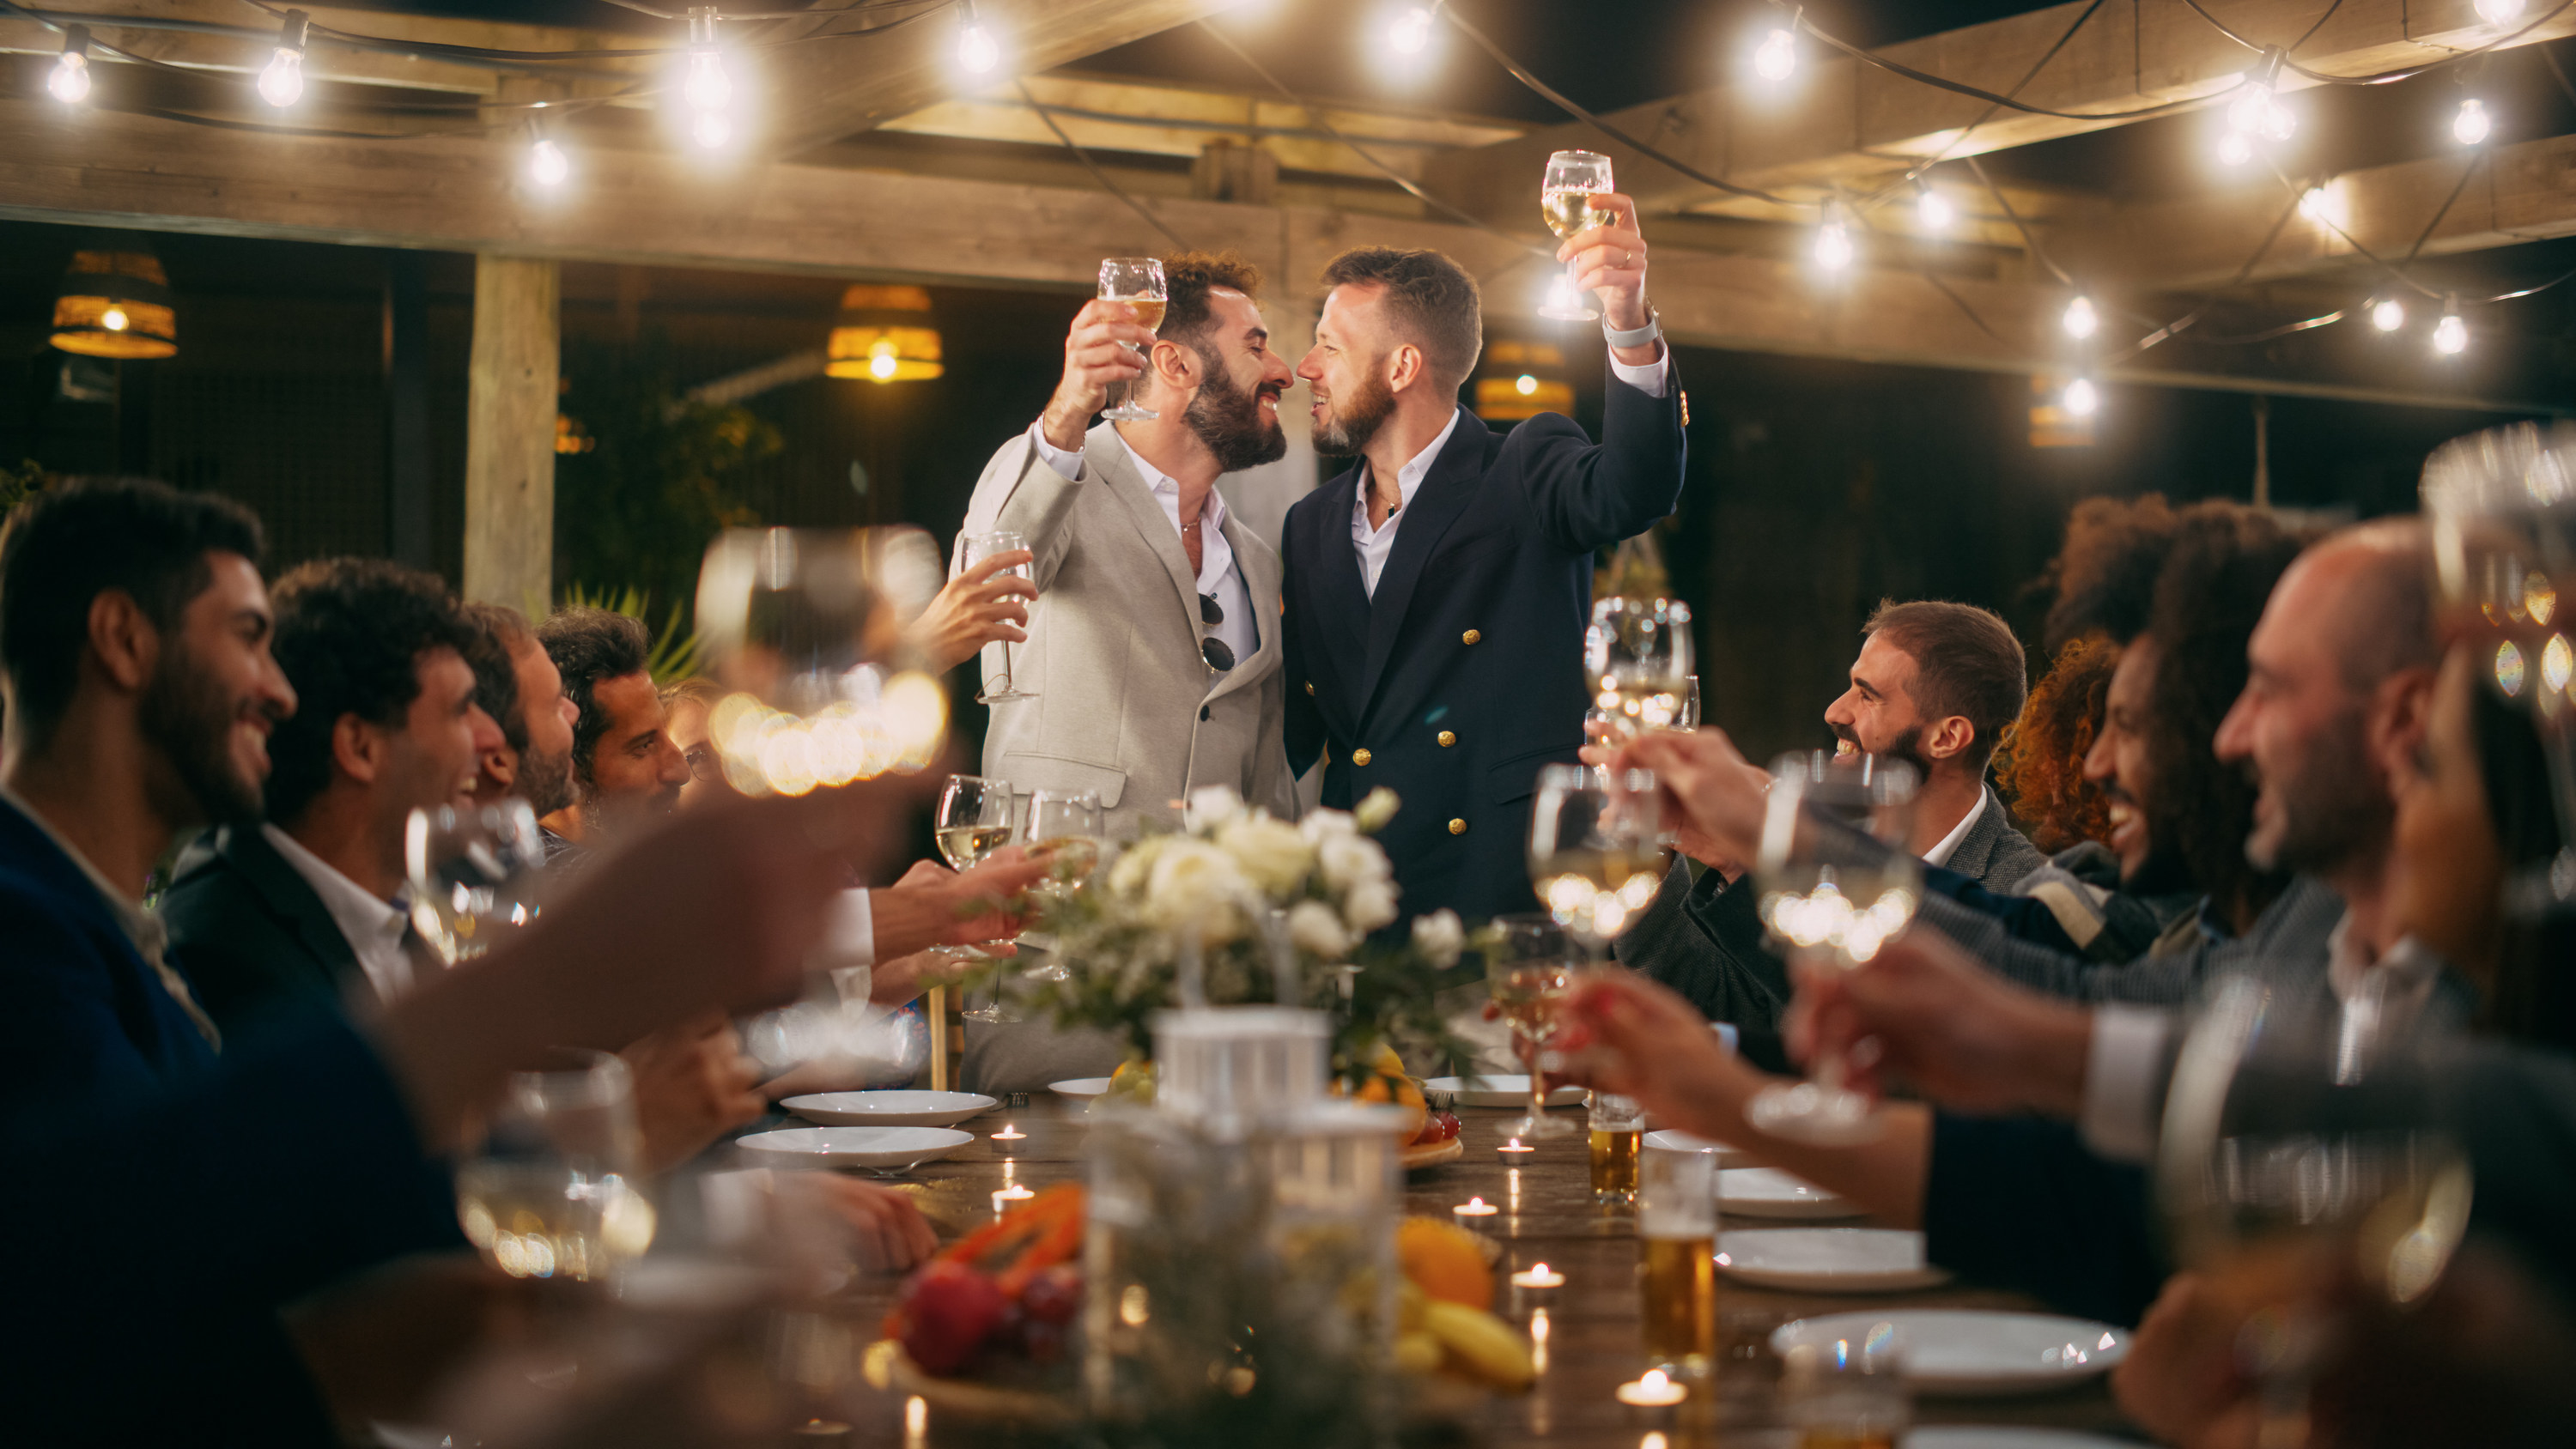 Two men kiss during a toast at their wedding reception